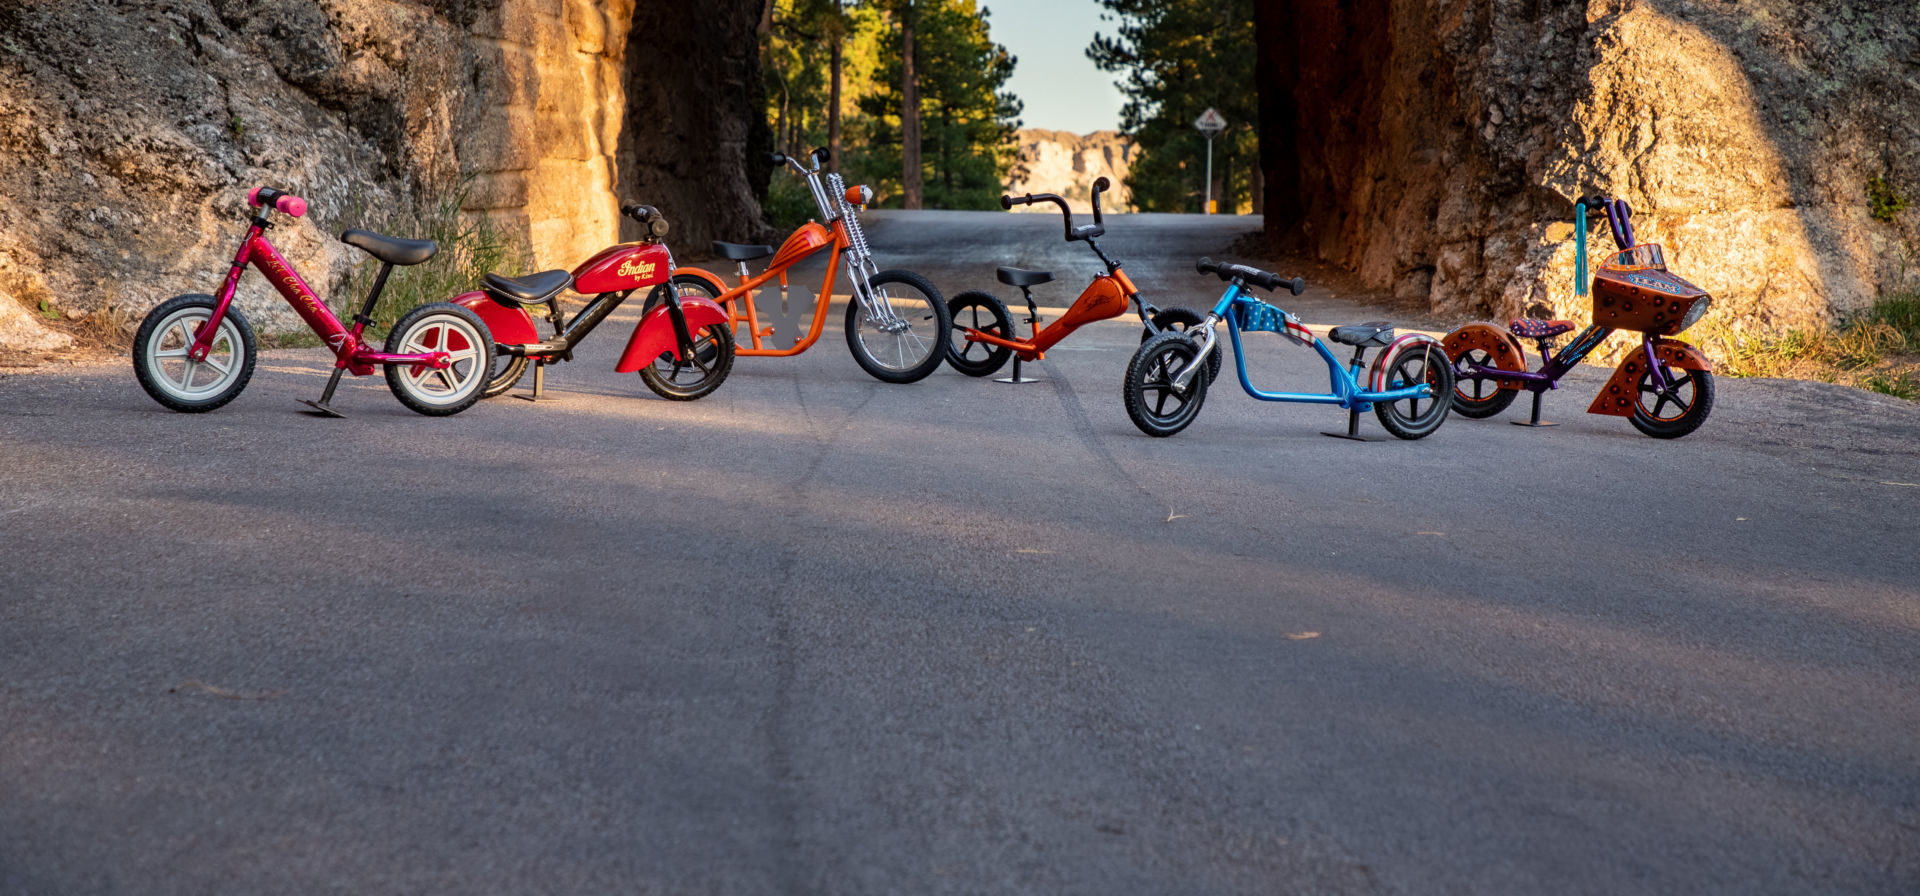 These customized Strider balance bikes will be auctioned January 27 in Las Vegas to benefit the All Kids Ride program. Photo courtesy Strider.